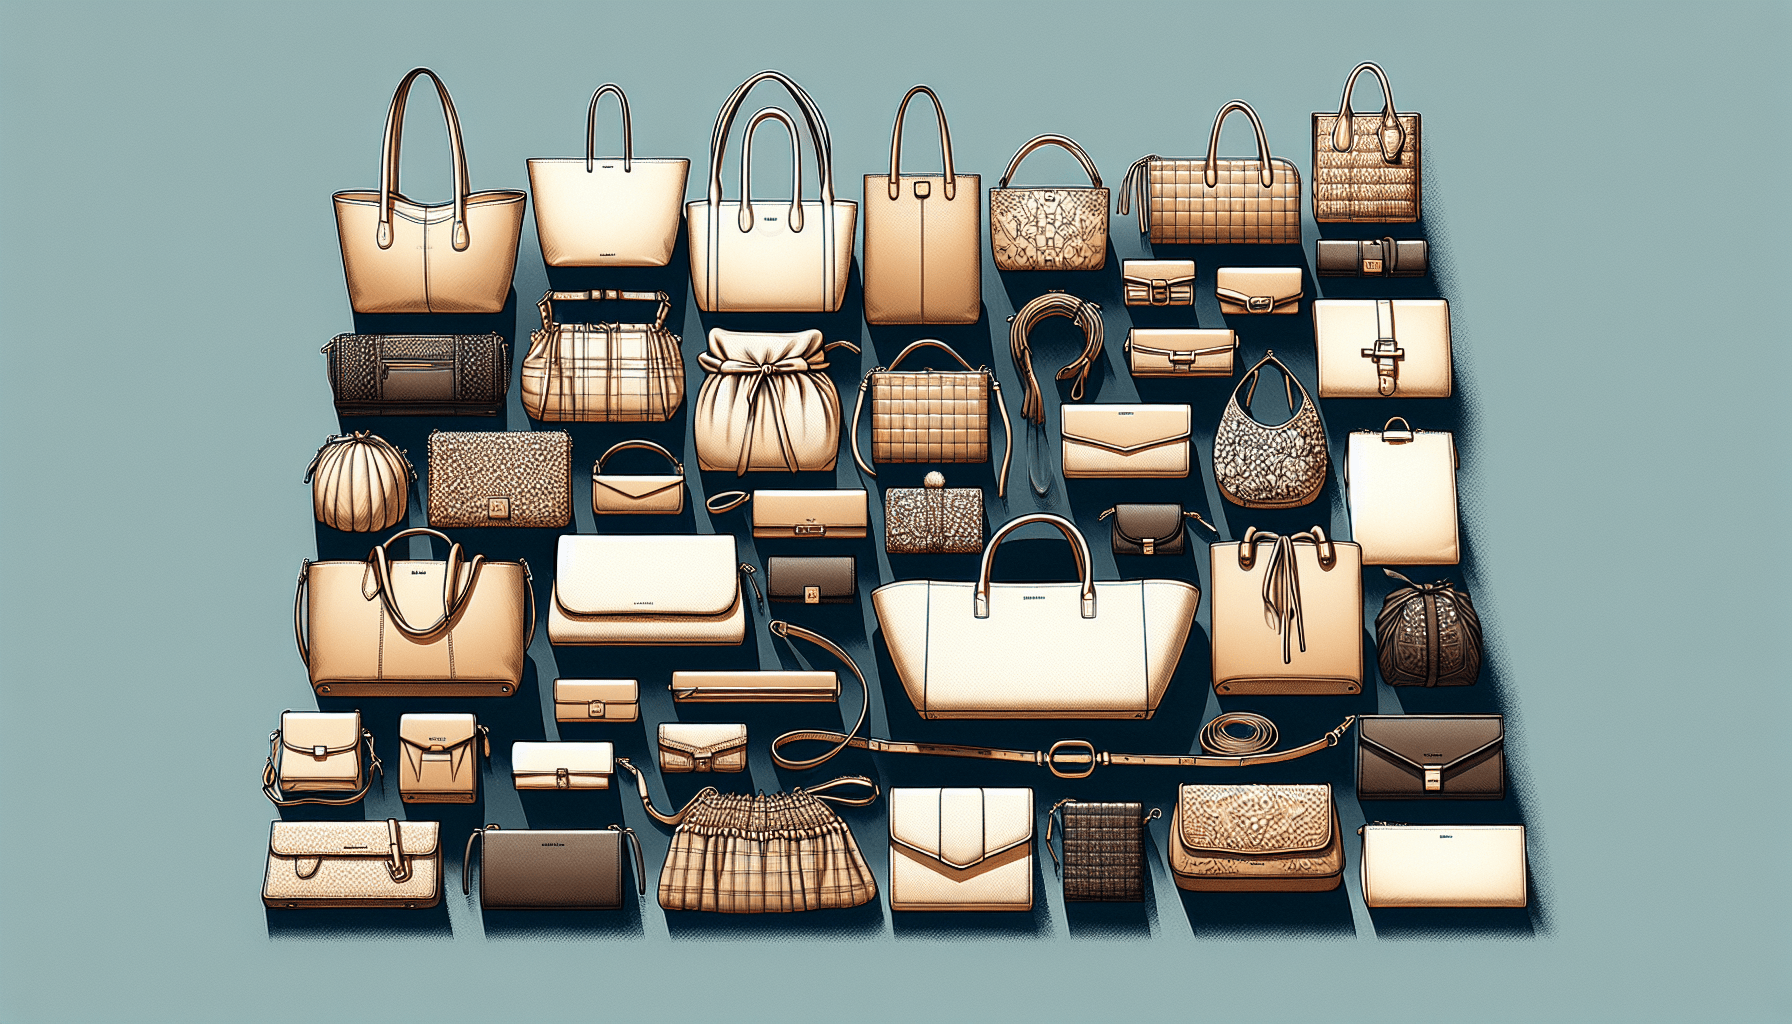 How To Decide Between Tote, Clutch, Or Crossbody Bags?